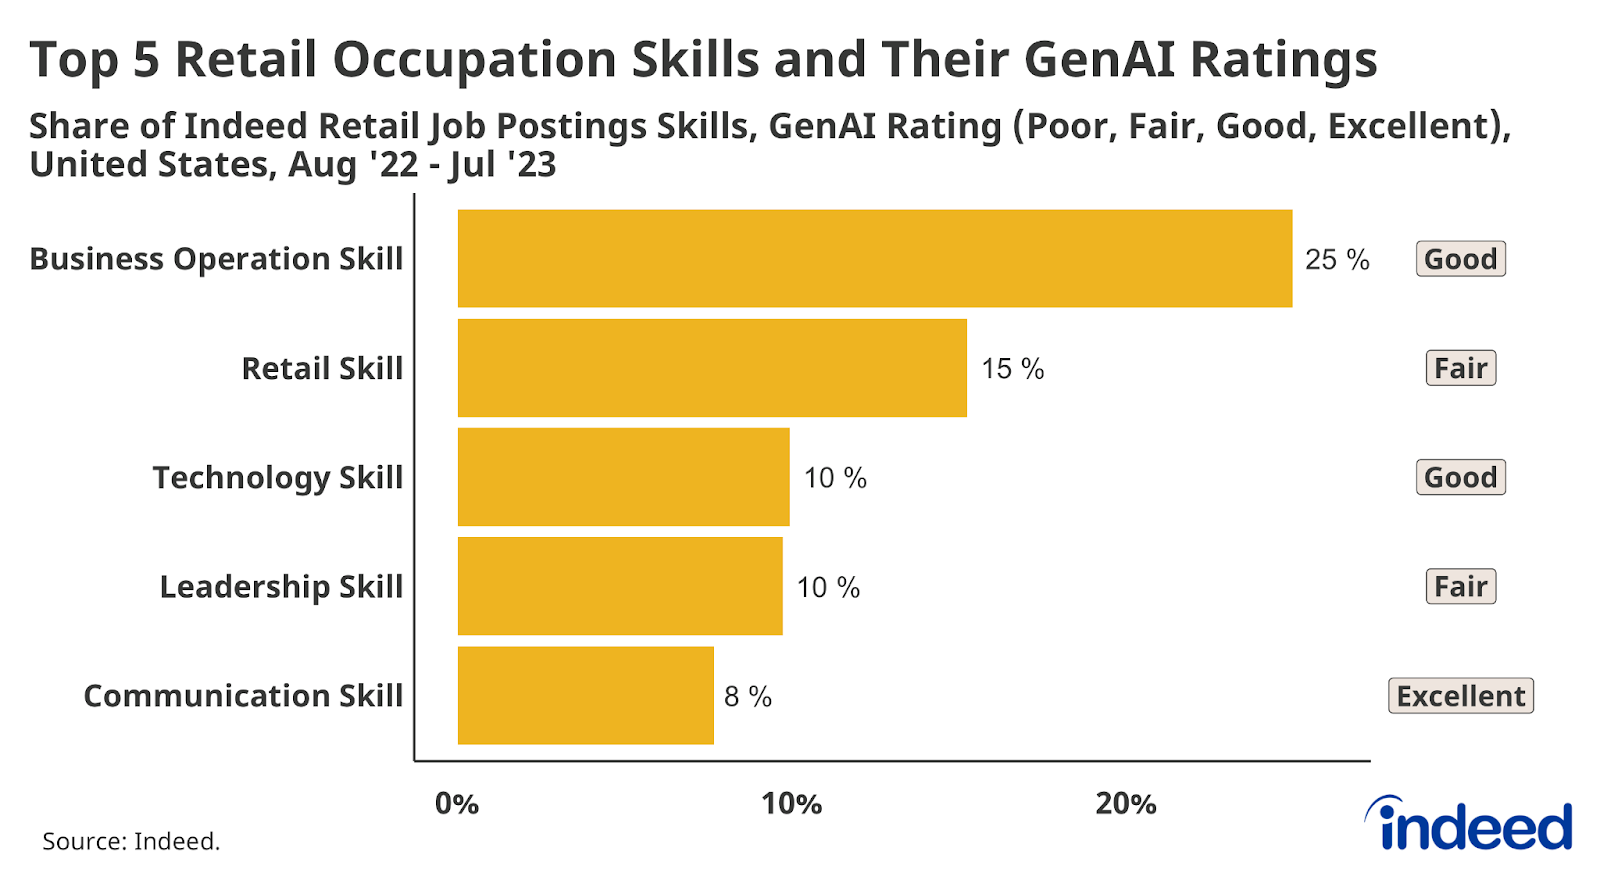 Bar graph titled “Top 5 Retail Occupation Skills and Their GenAI Ratings.” With a vertical axis comprising the five retail skills, and a horizontal axis of 0% to 25%, the graph shows the GenAI rating for each share of job postings skills.